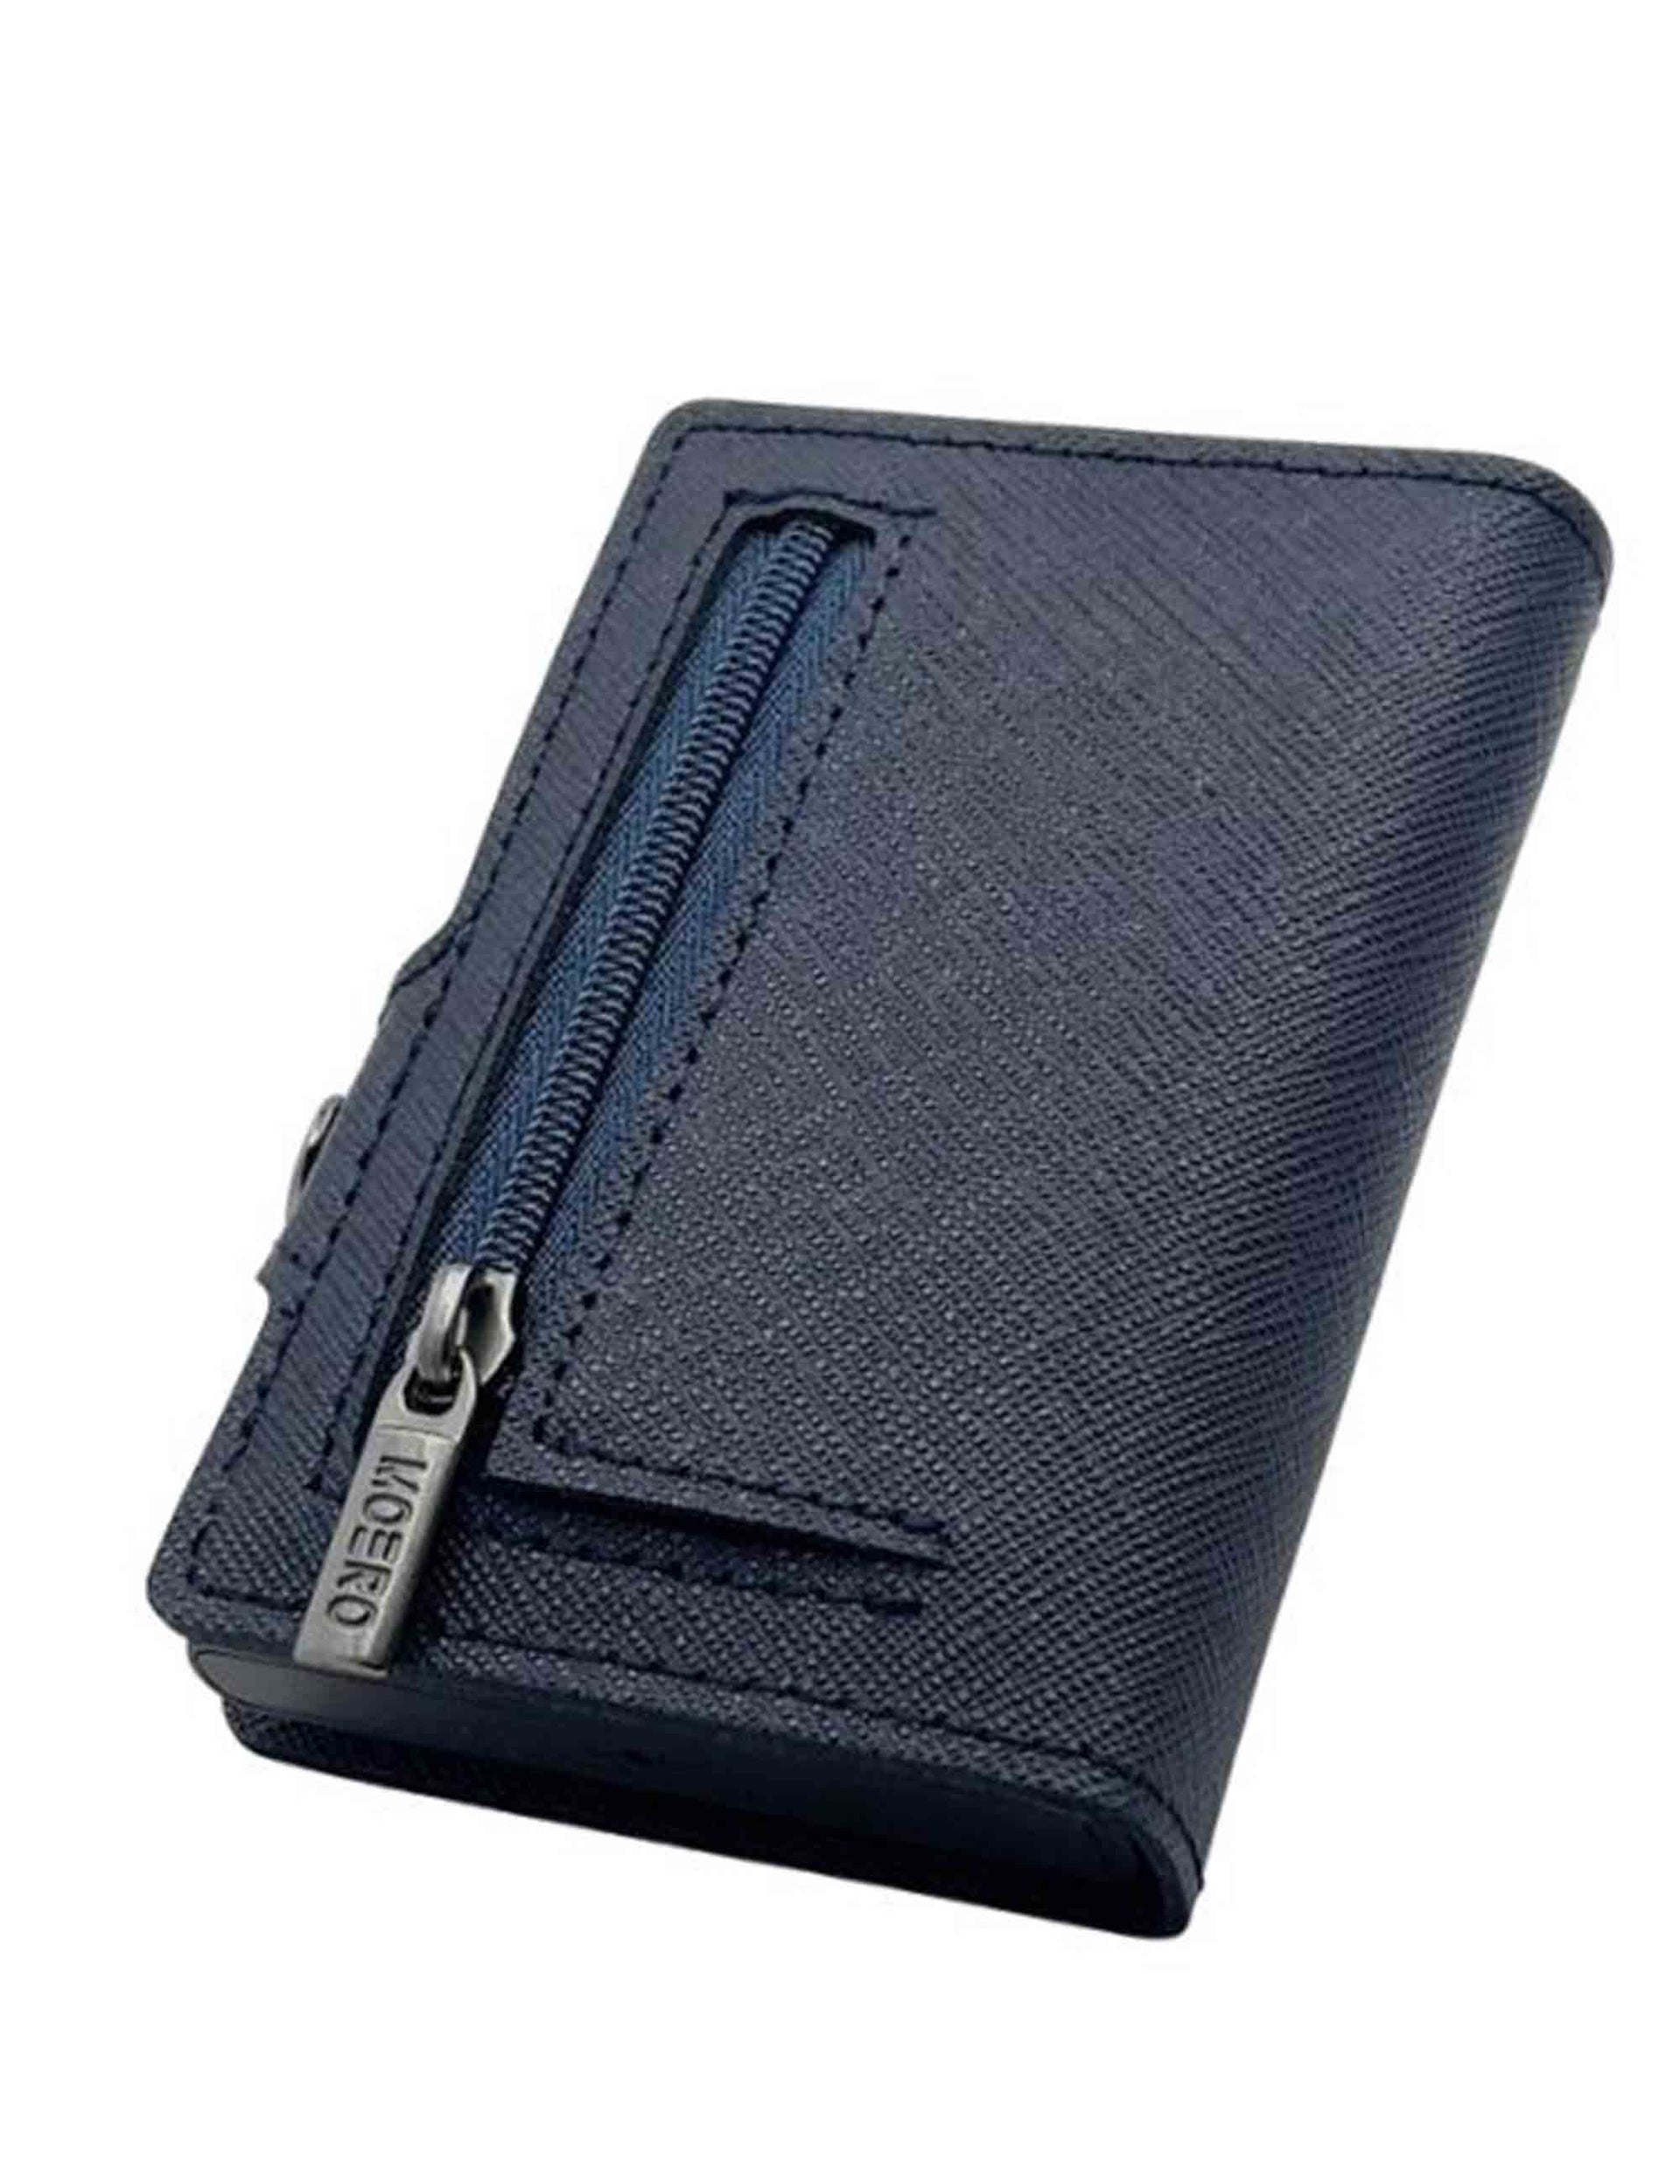 Scratch-resistant navy blue saffiano leather card holder with coin purse